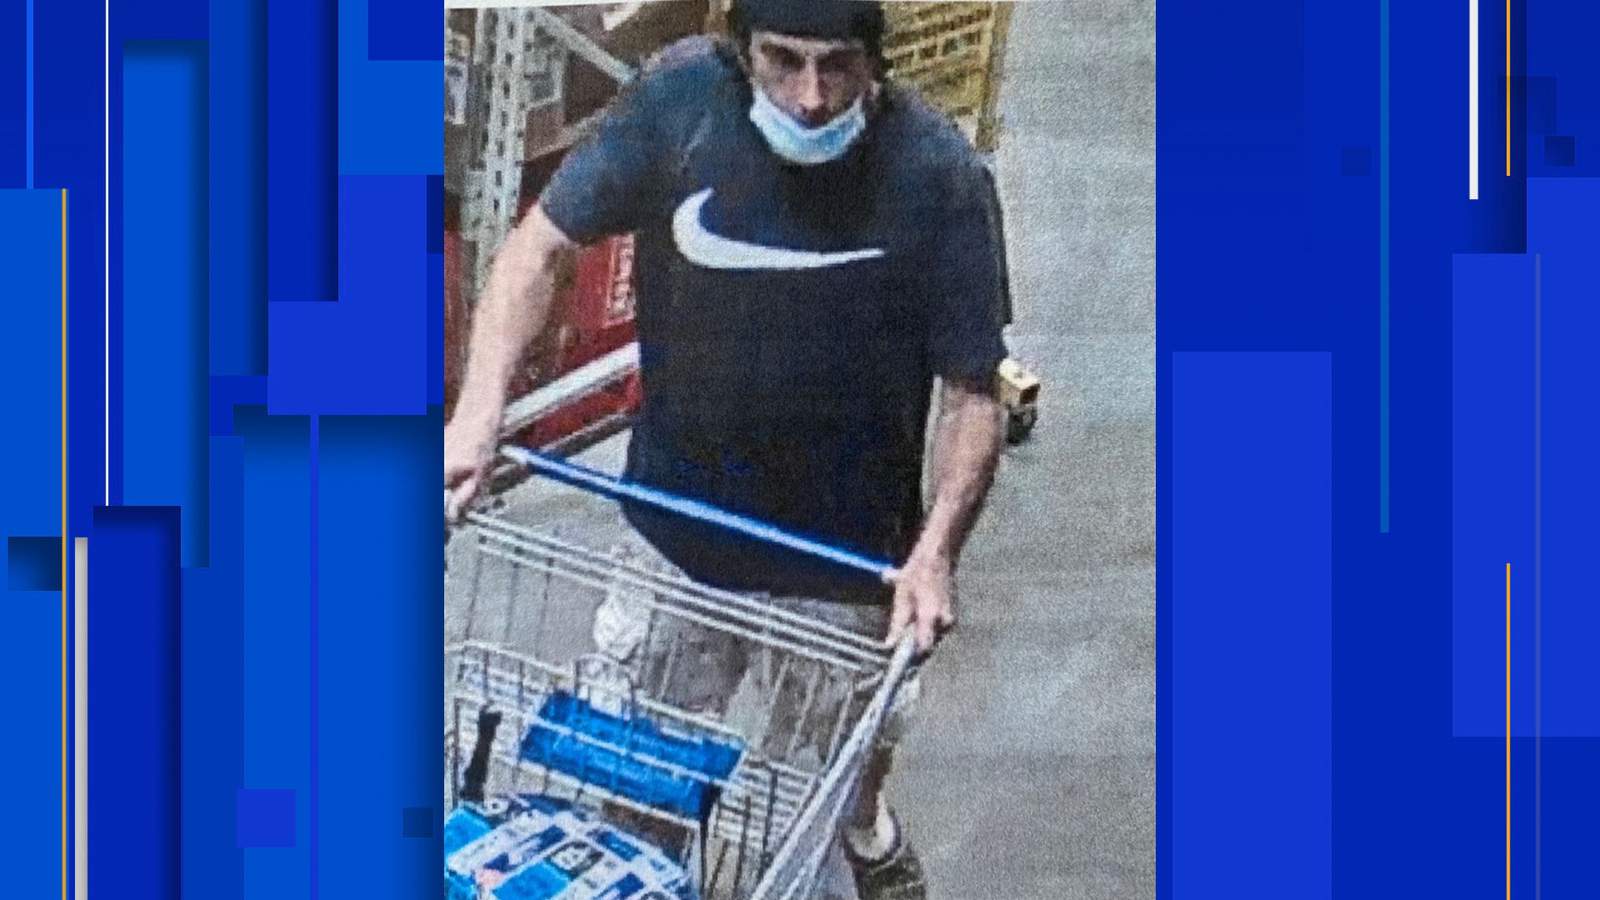 Lynchburg police looking for Nike-clad man accused of shoplifting from Lowe’s